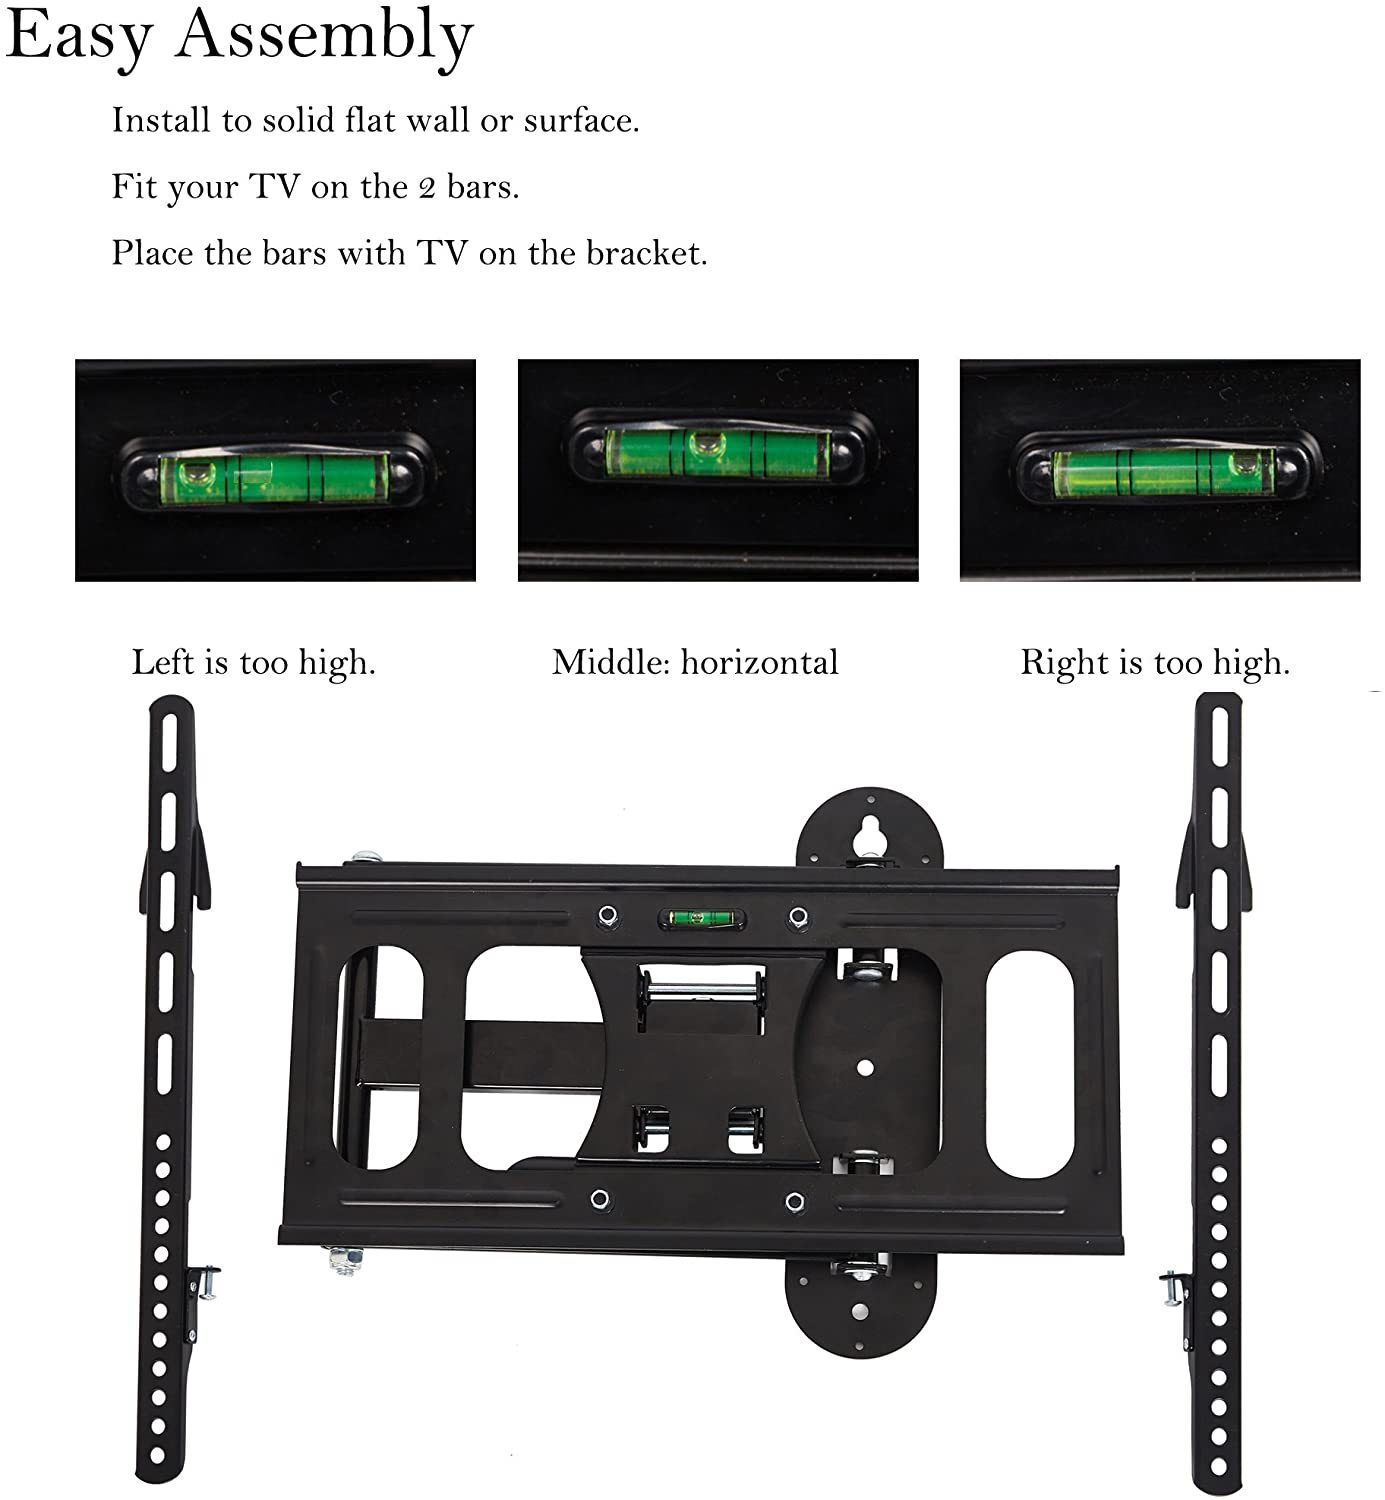 Full Motion TV Wall Mount for 23”-55” Flat Screen TVs, Monitor with Swivel Articulating Arms, up to VESA 400x400mm and 66 lbs